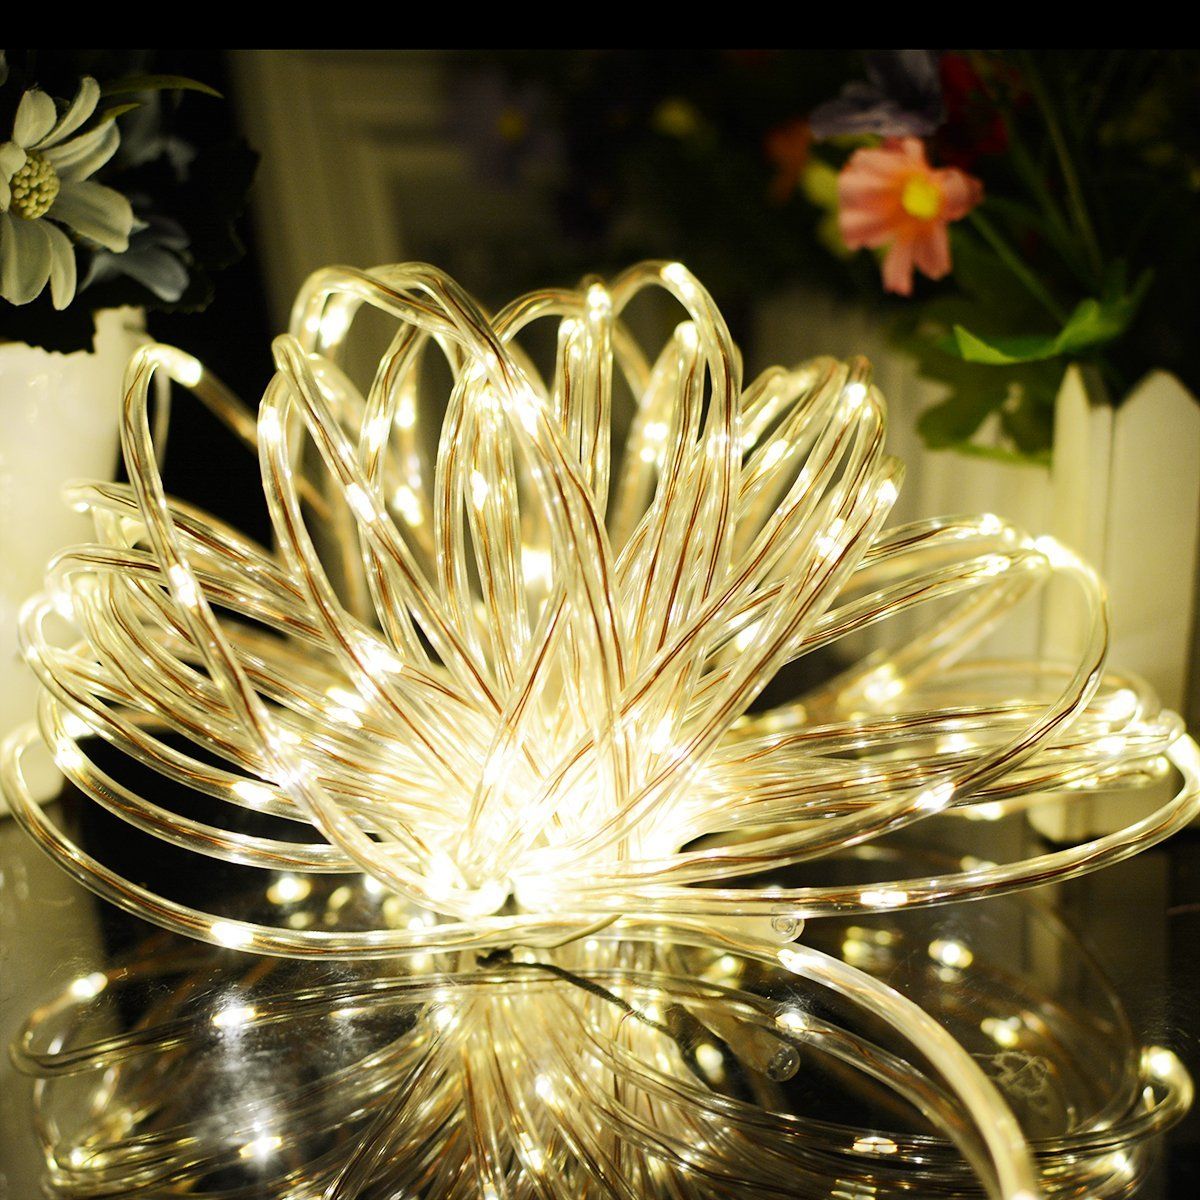 Solar-Powered-120LEDs-8Modes-Waterproof-Fairy-Copper-Wire-Rope-String-Light-for-Christmas-1199953